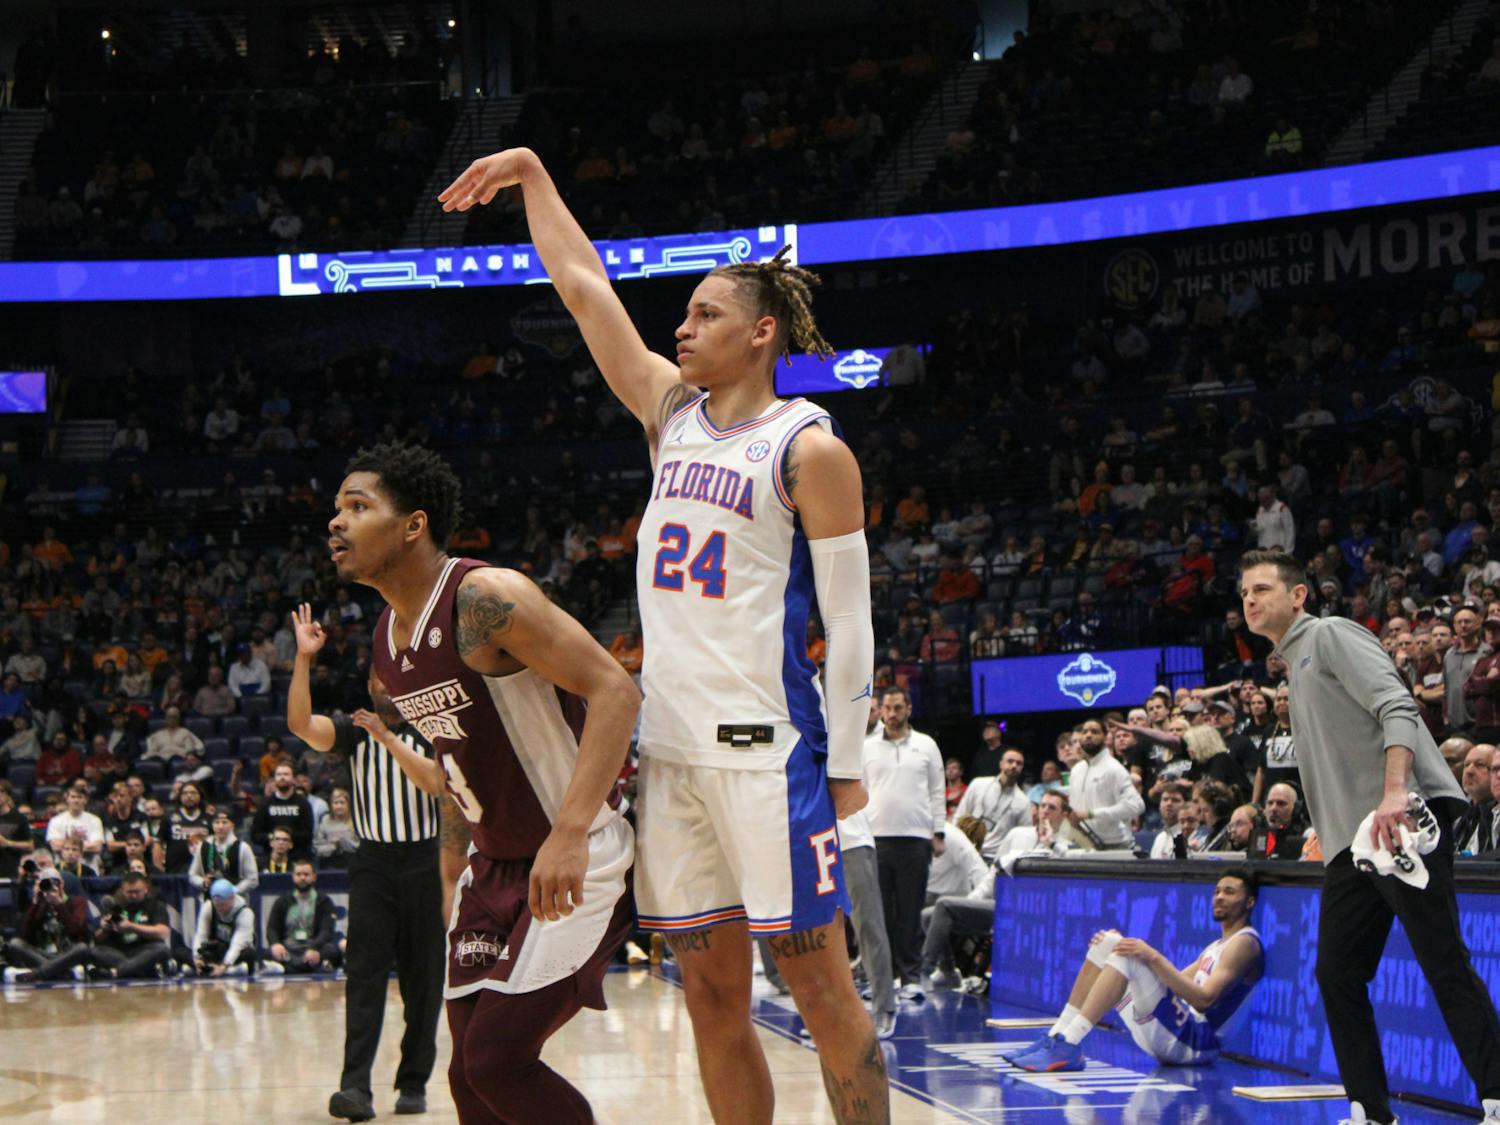 Florida guard Riley Kugel follows through on a jump shot in the Gators' 69-68 loss to the Mississippi State Bulldogs in the second round of the Southeastern Conference Tournament Thursday, March 9, 2023.